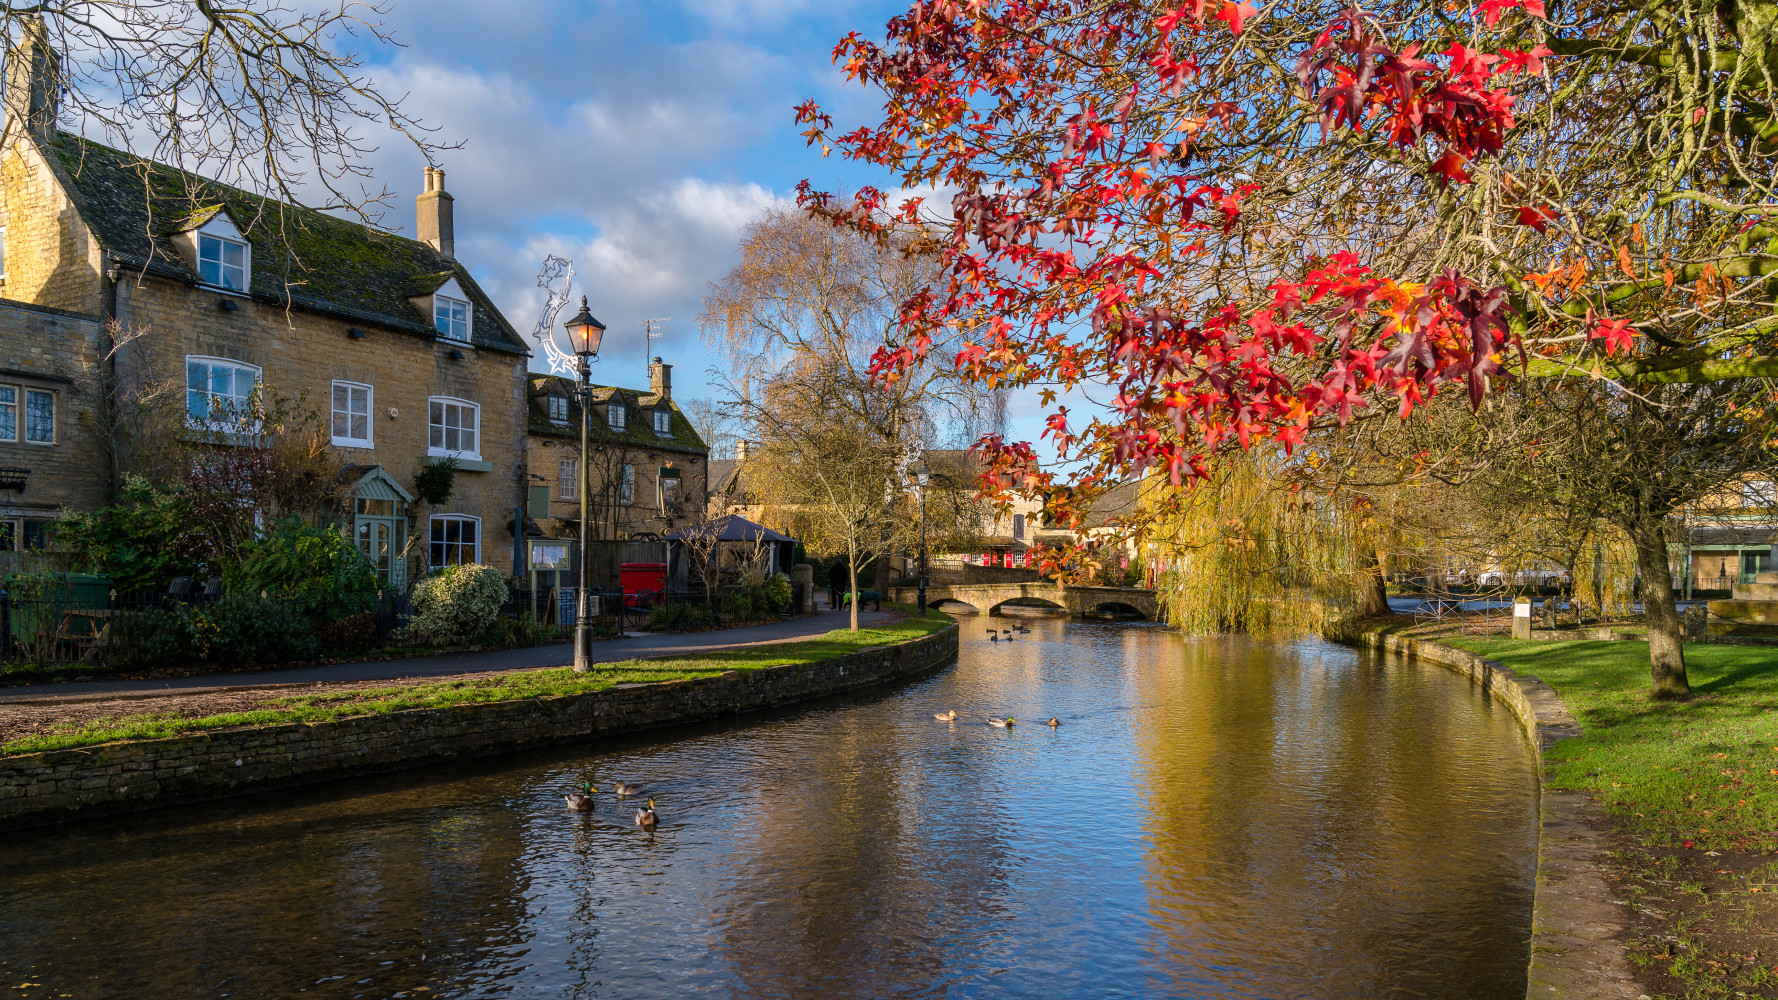 Bourton-on-the-Water, England